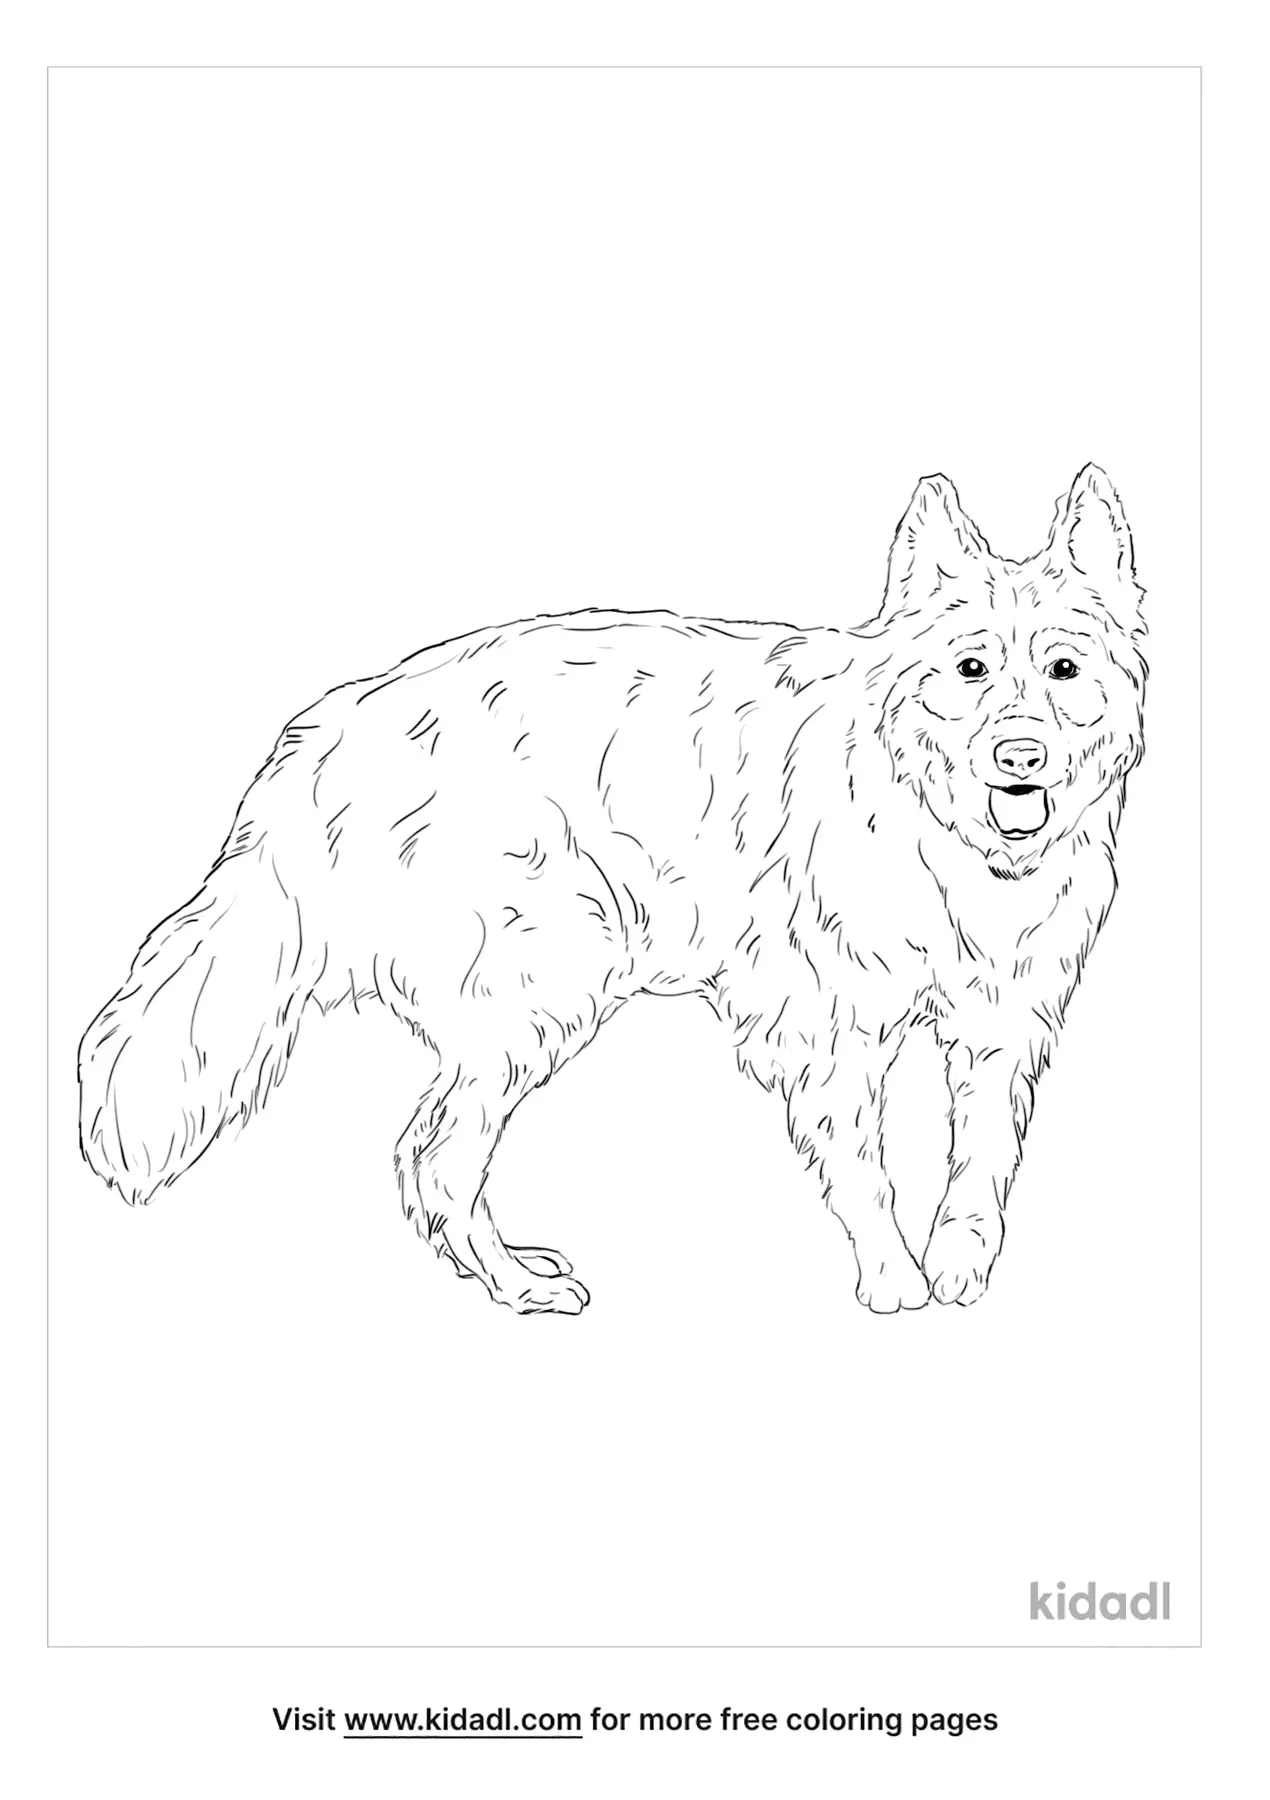 Swift Fox Coloring Page | Free Animals Coloring Page | Kidadl